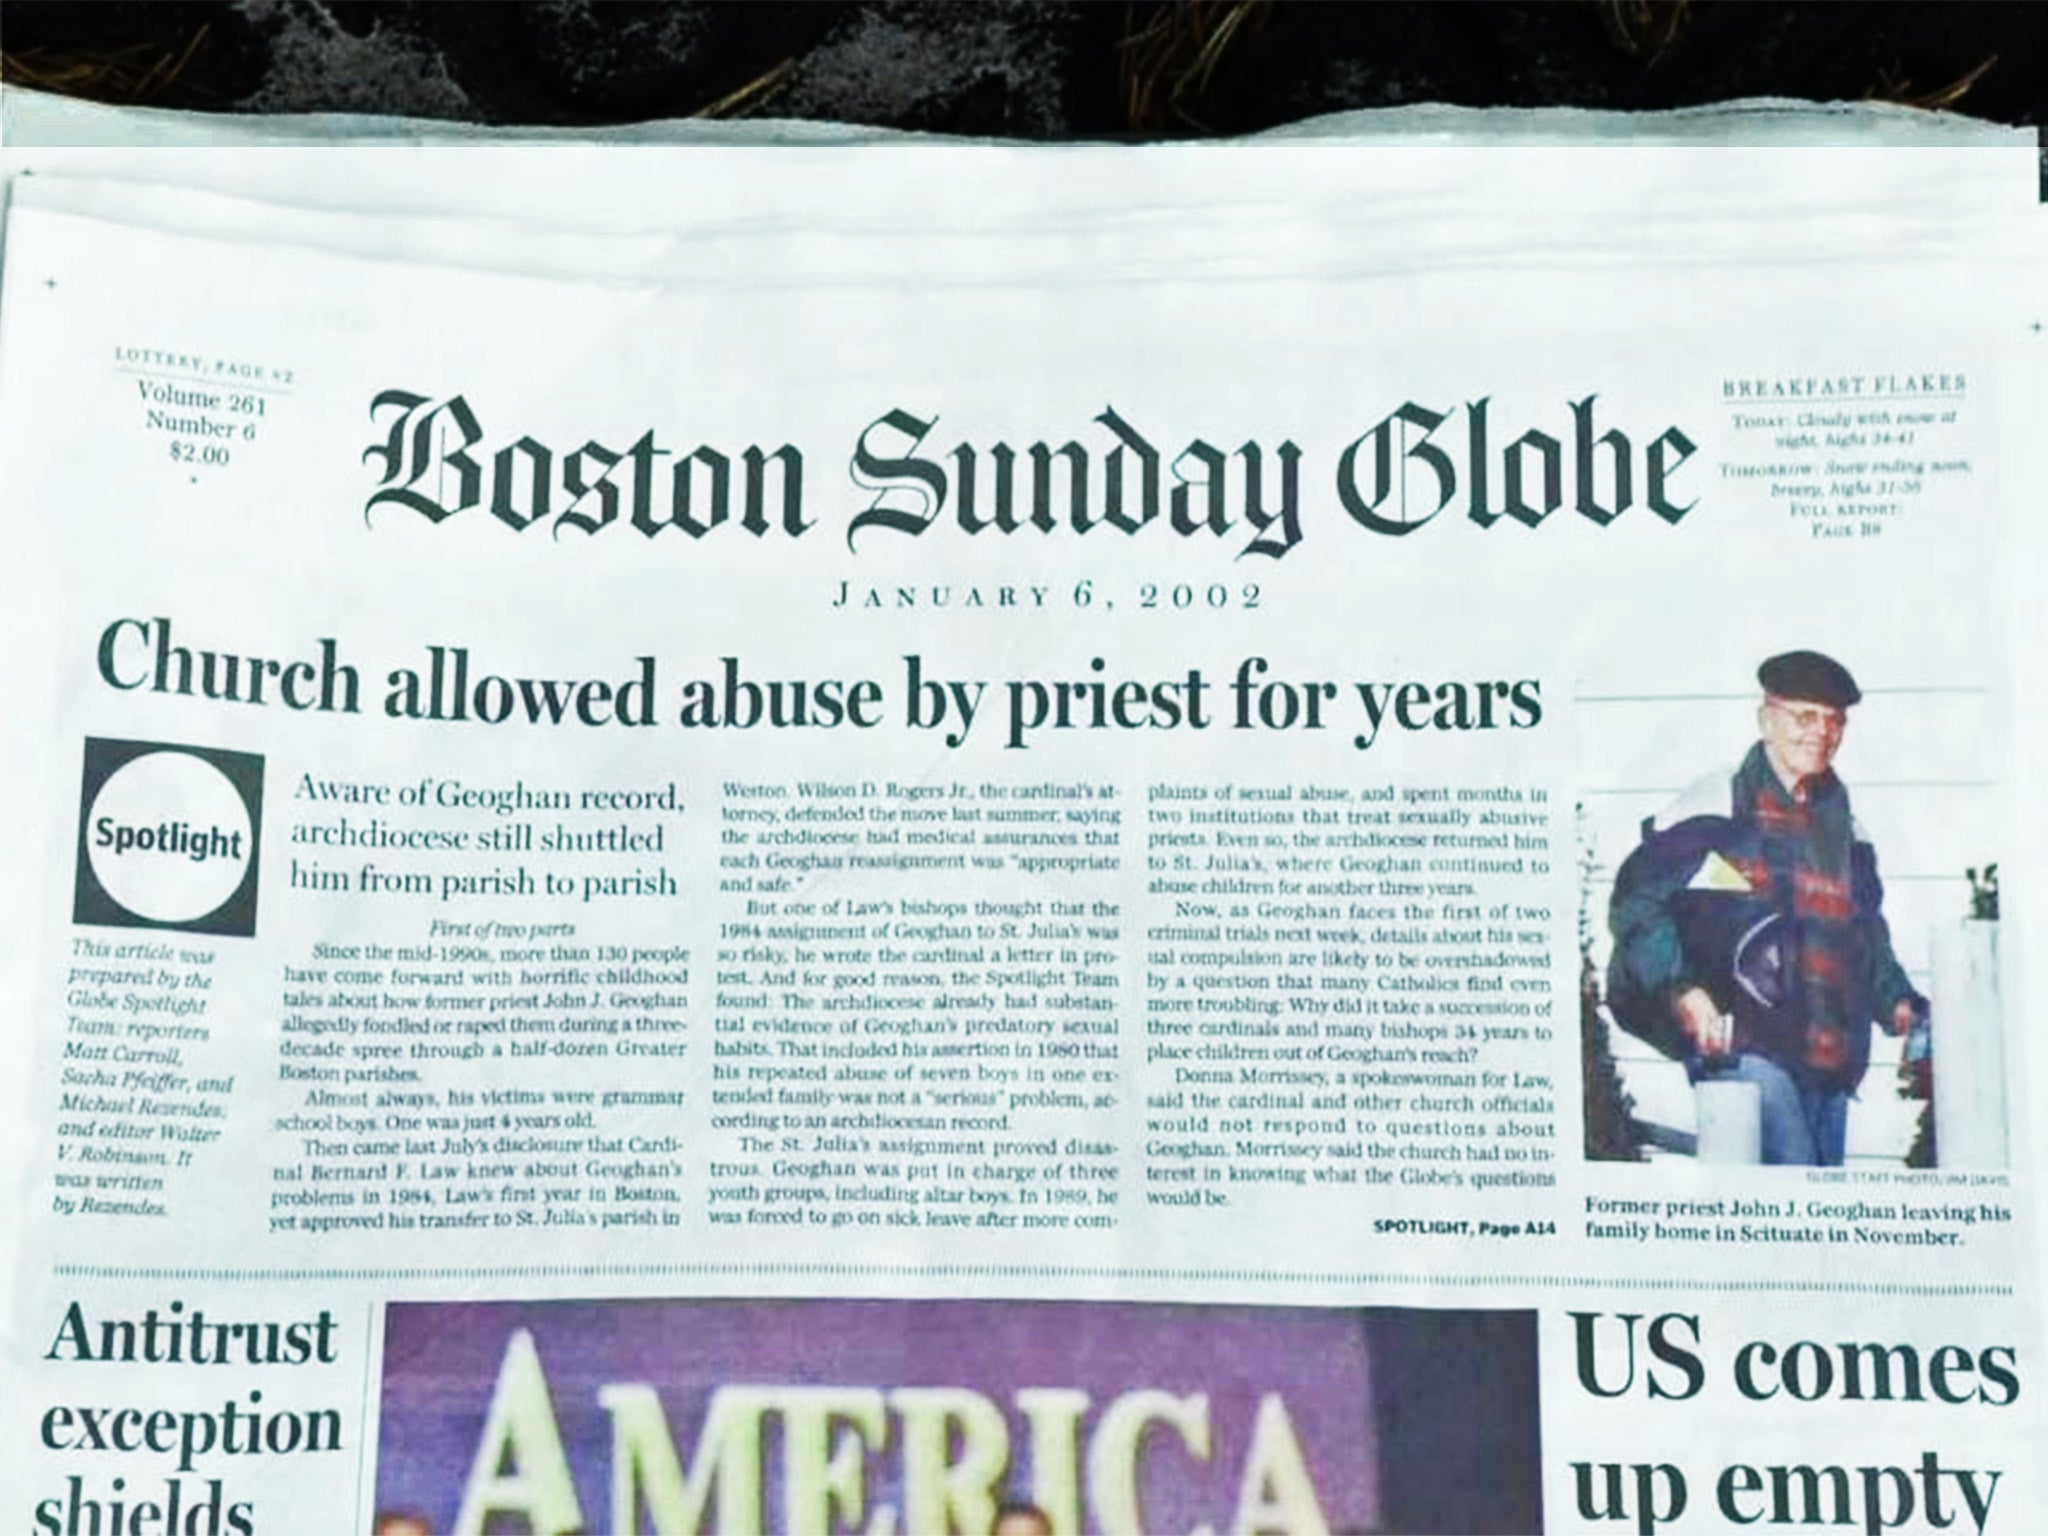 Revelations: the day the story was broken by the Globe's Spotlight team